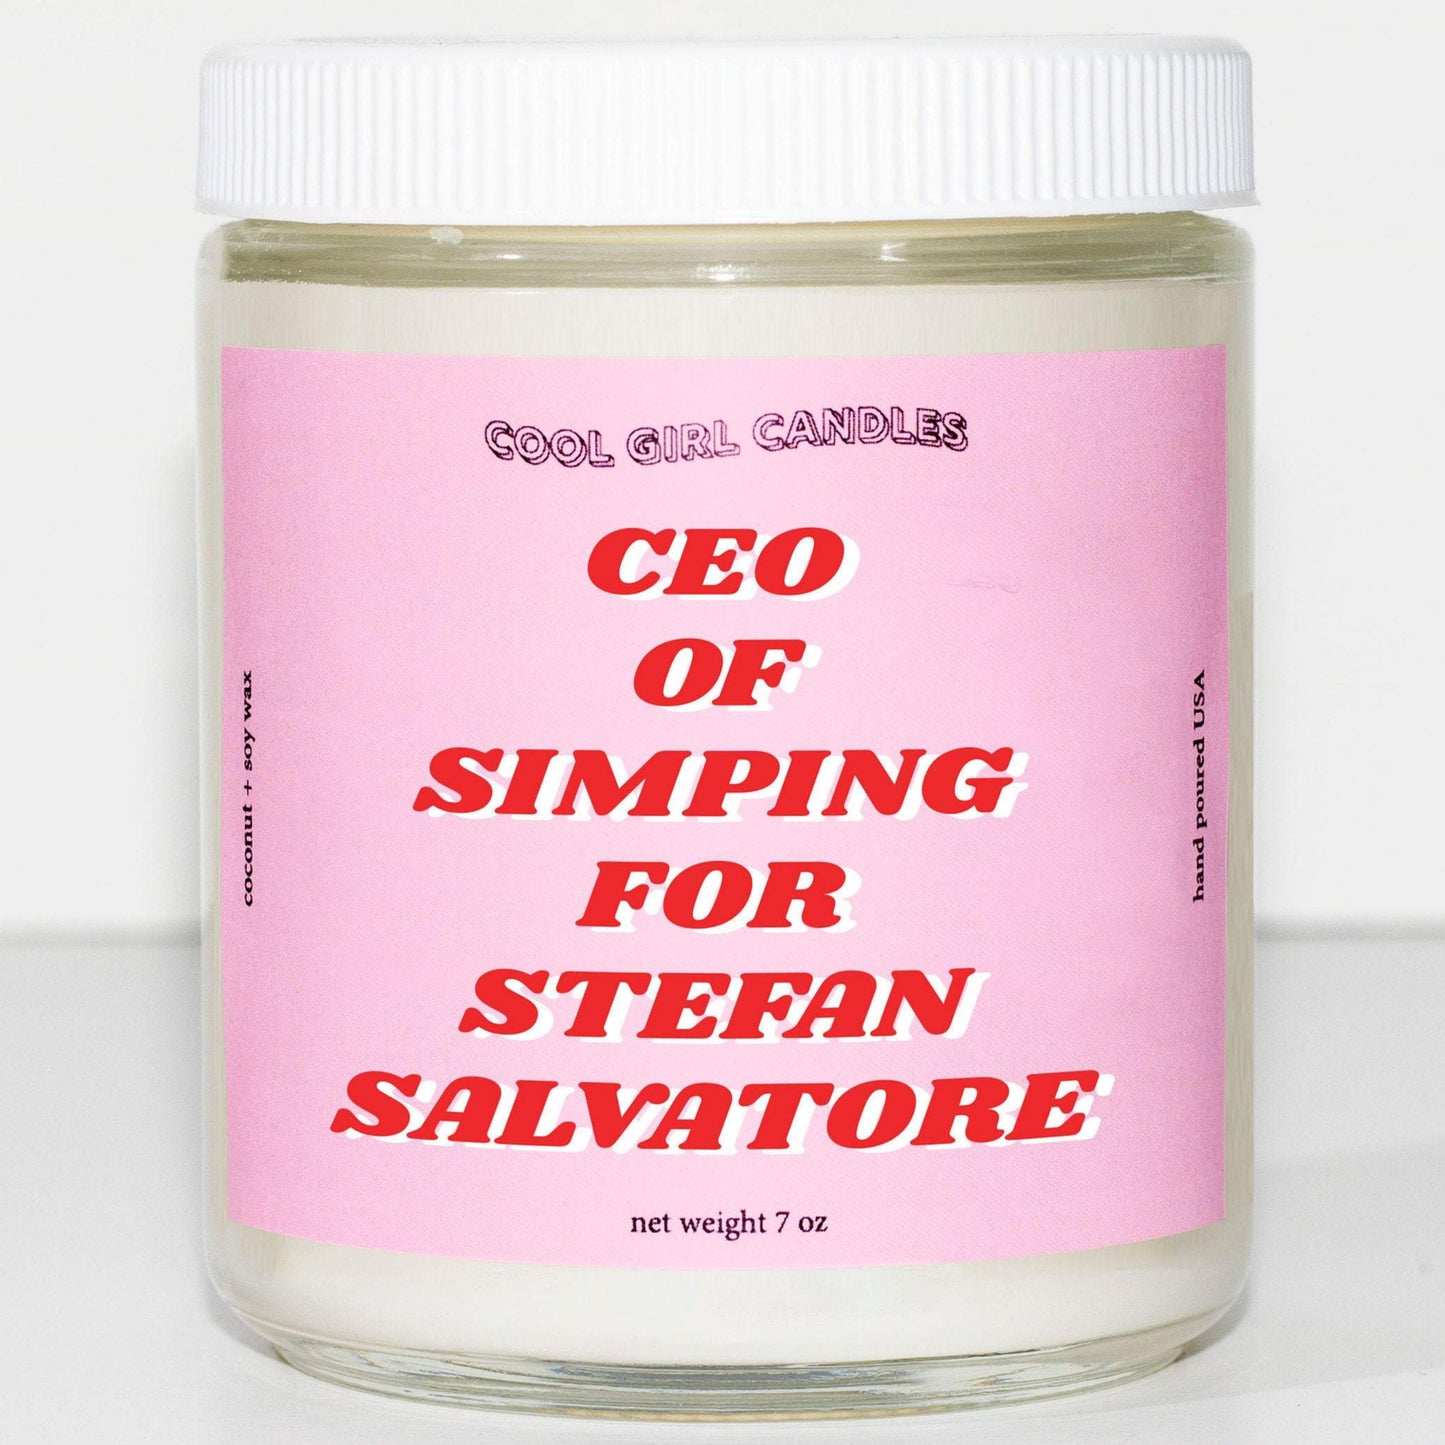 CEO of Simping For Stefan Salvatore Candle